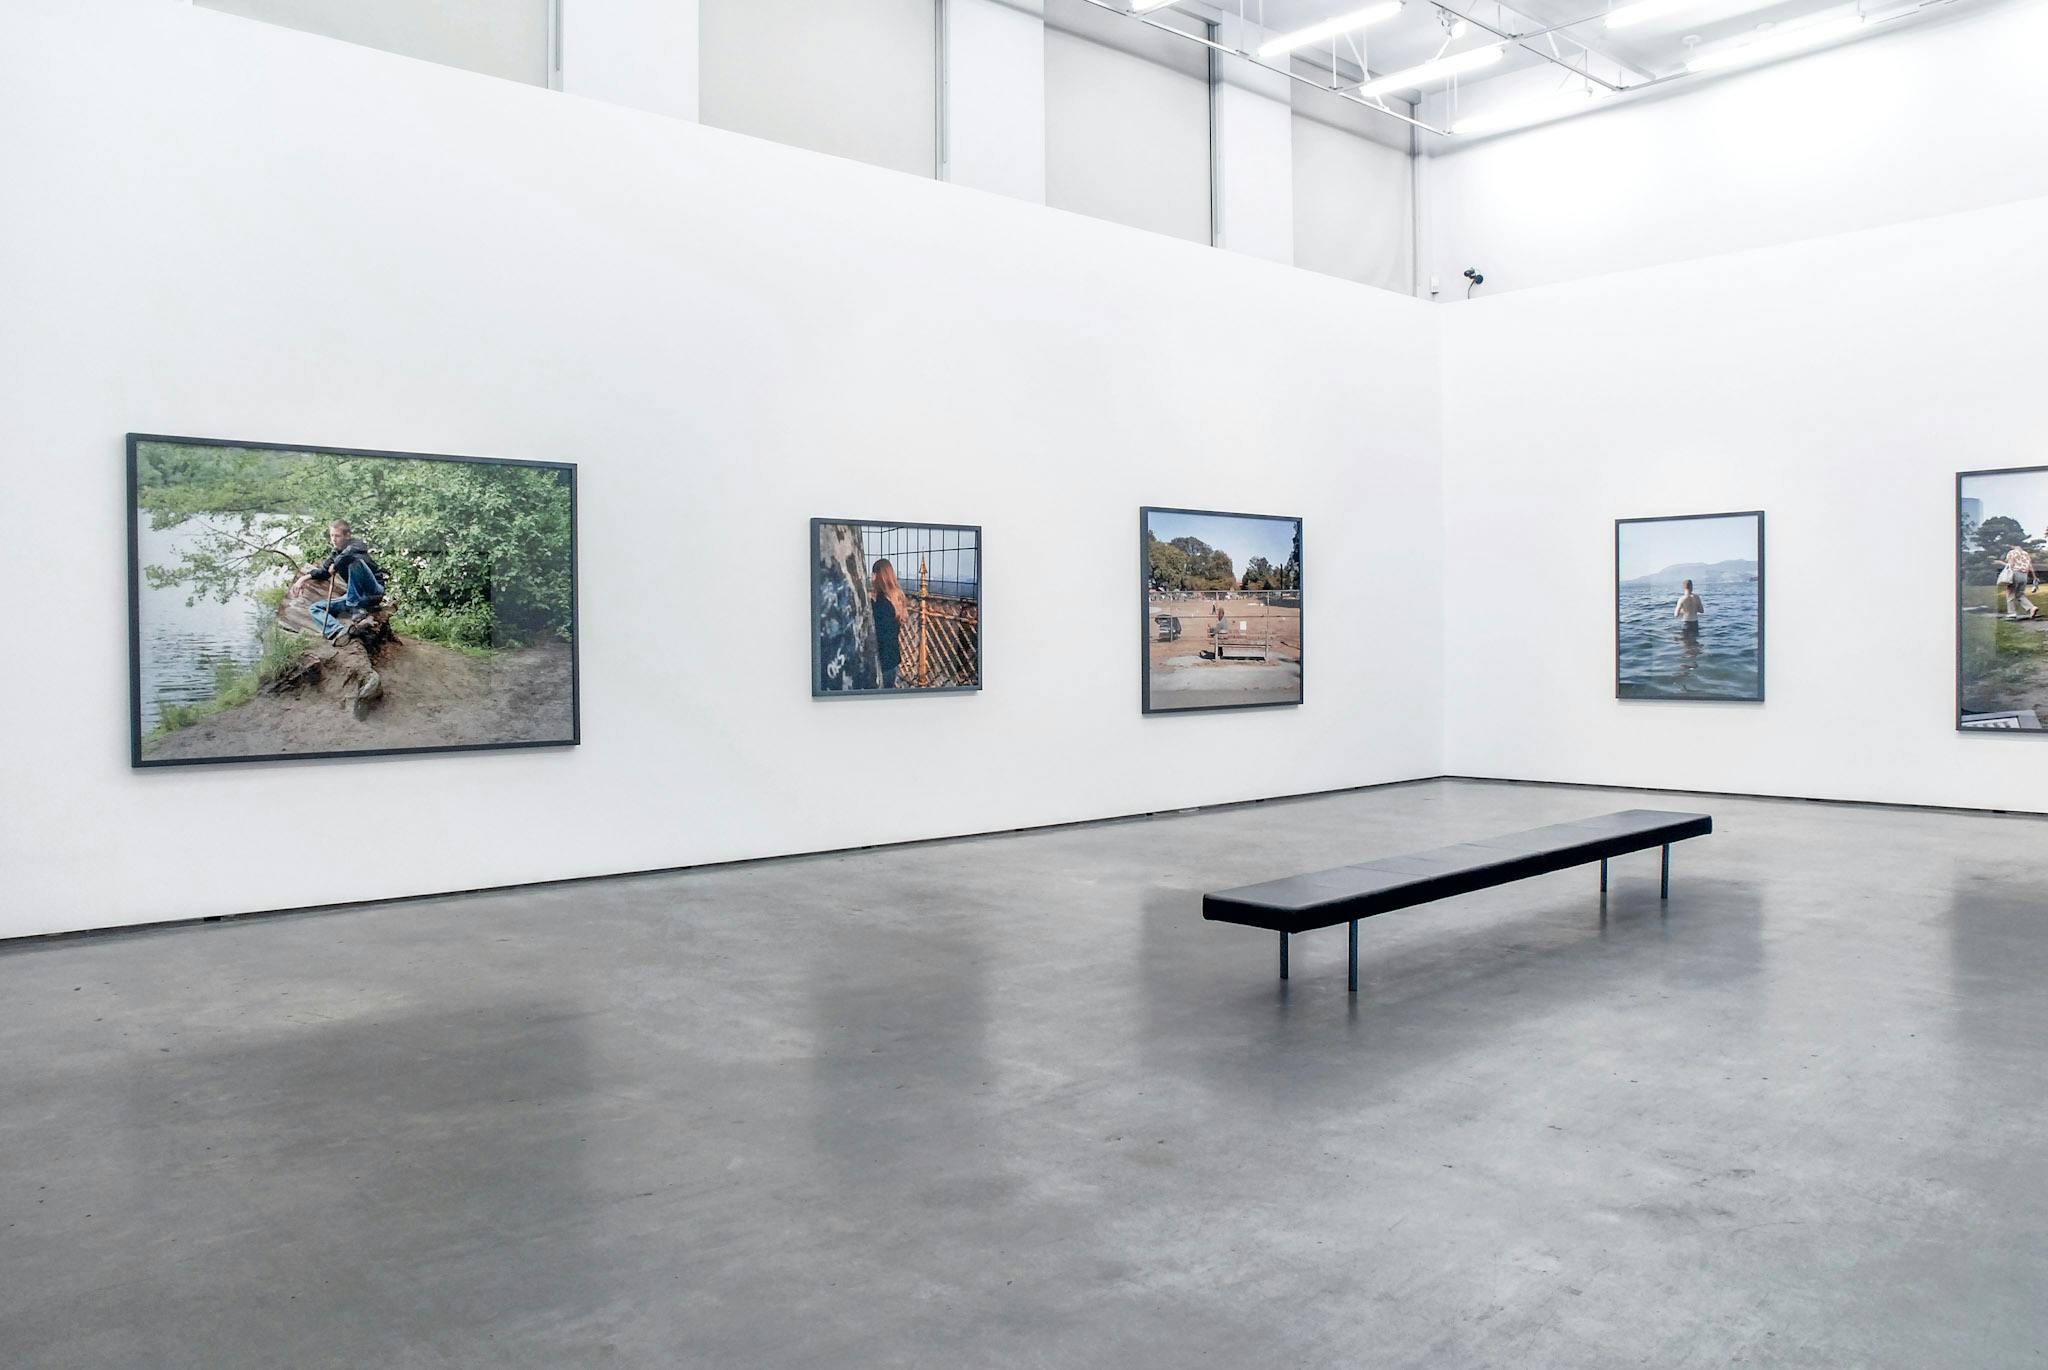 Various large-sized coloured photographs are installed in a gallery space. The photograph on the left depicts a young person sitting on a tree stump beside a body of water. 